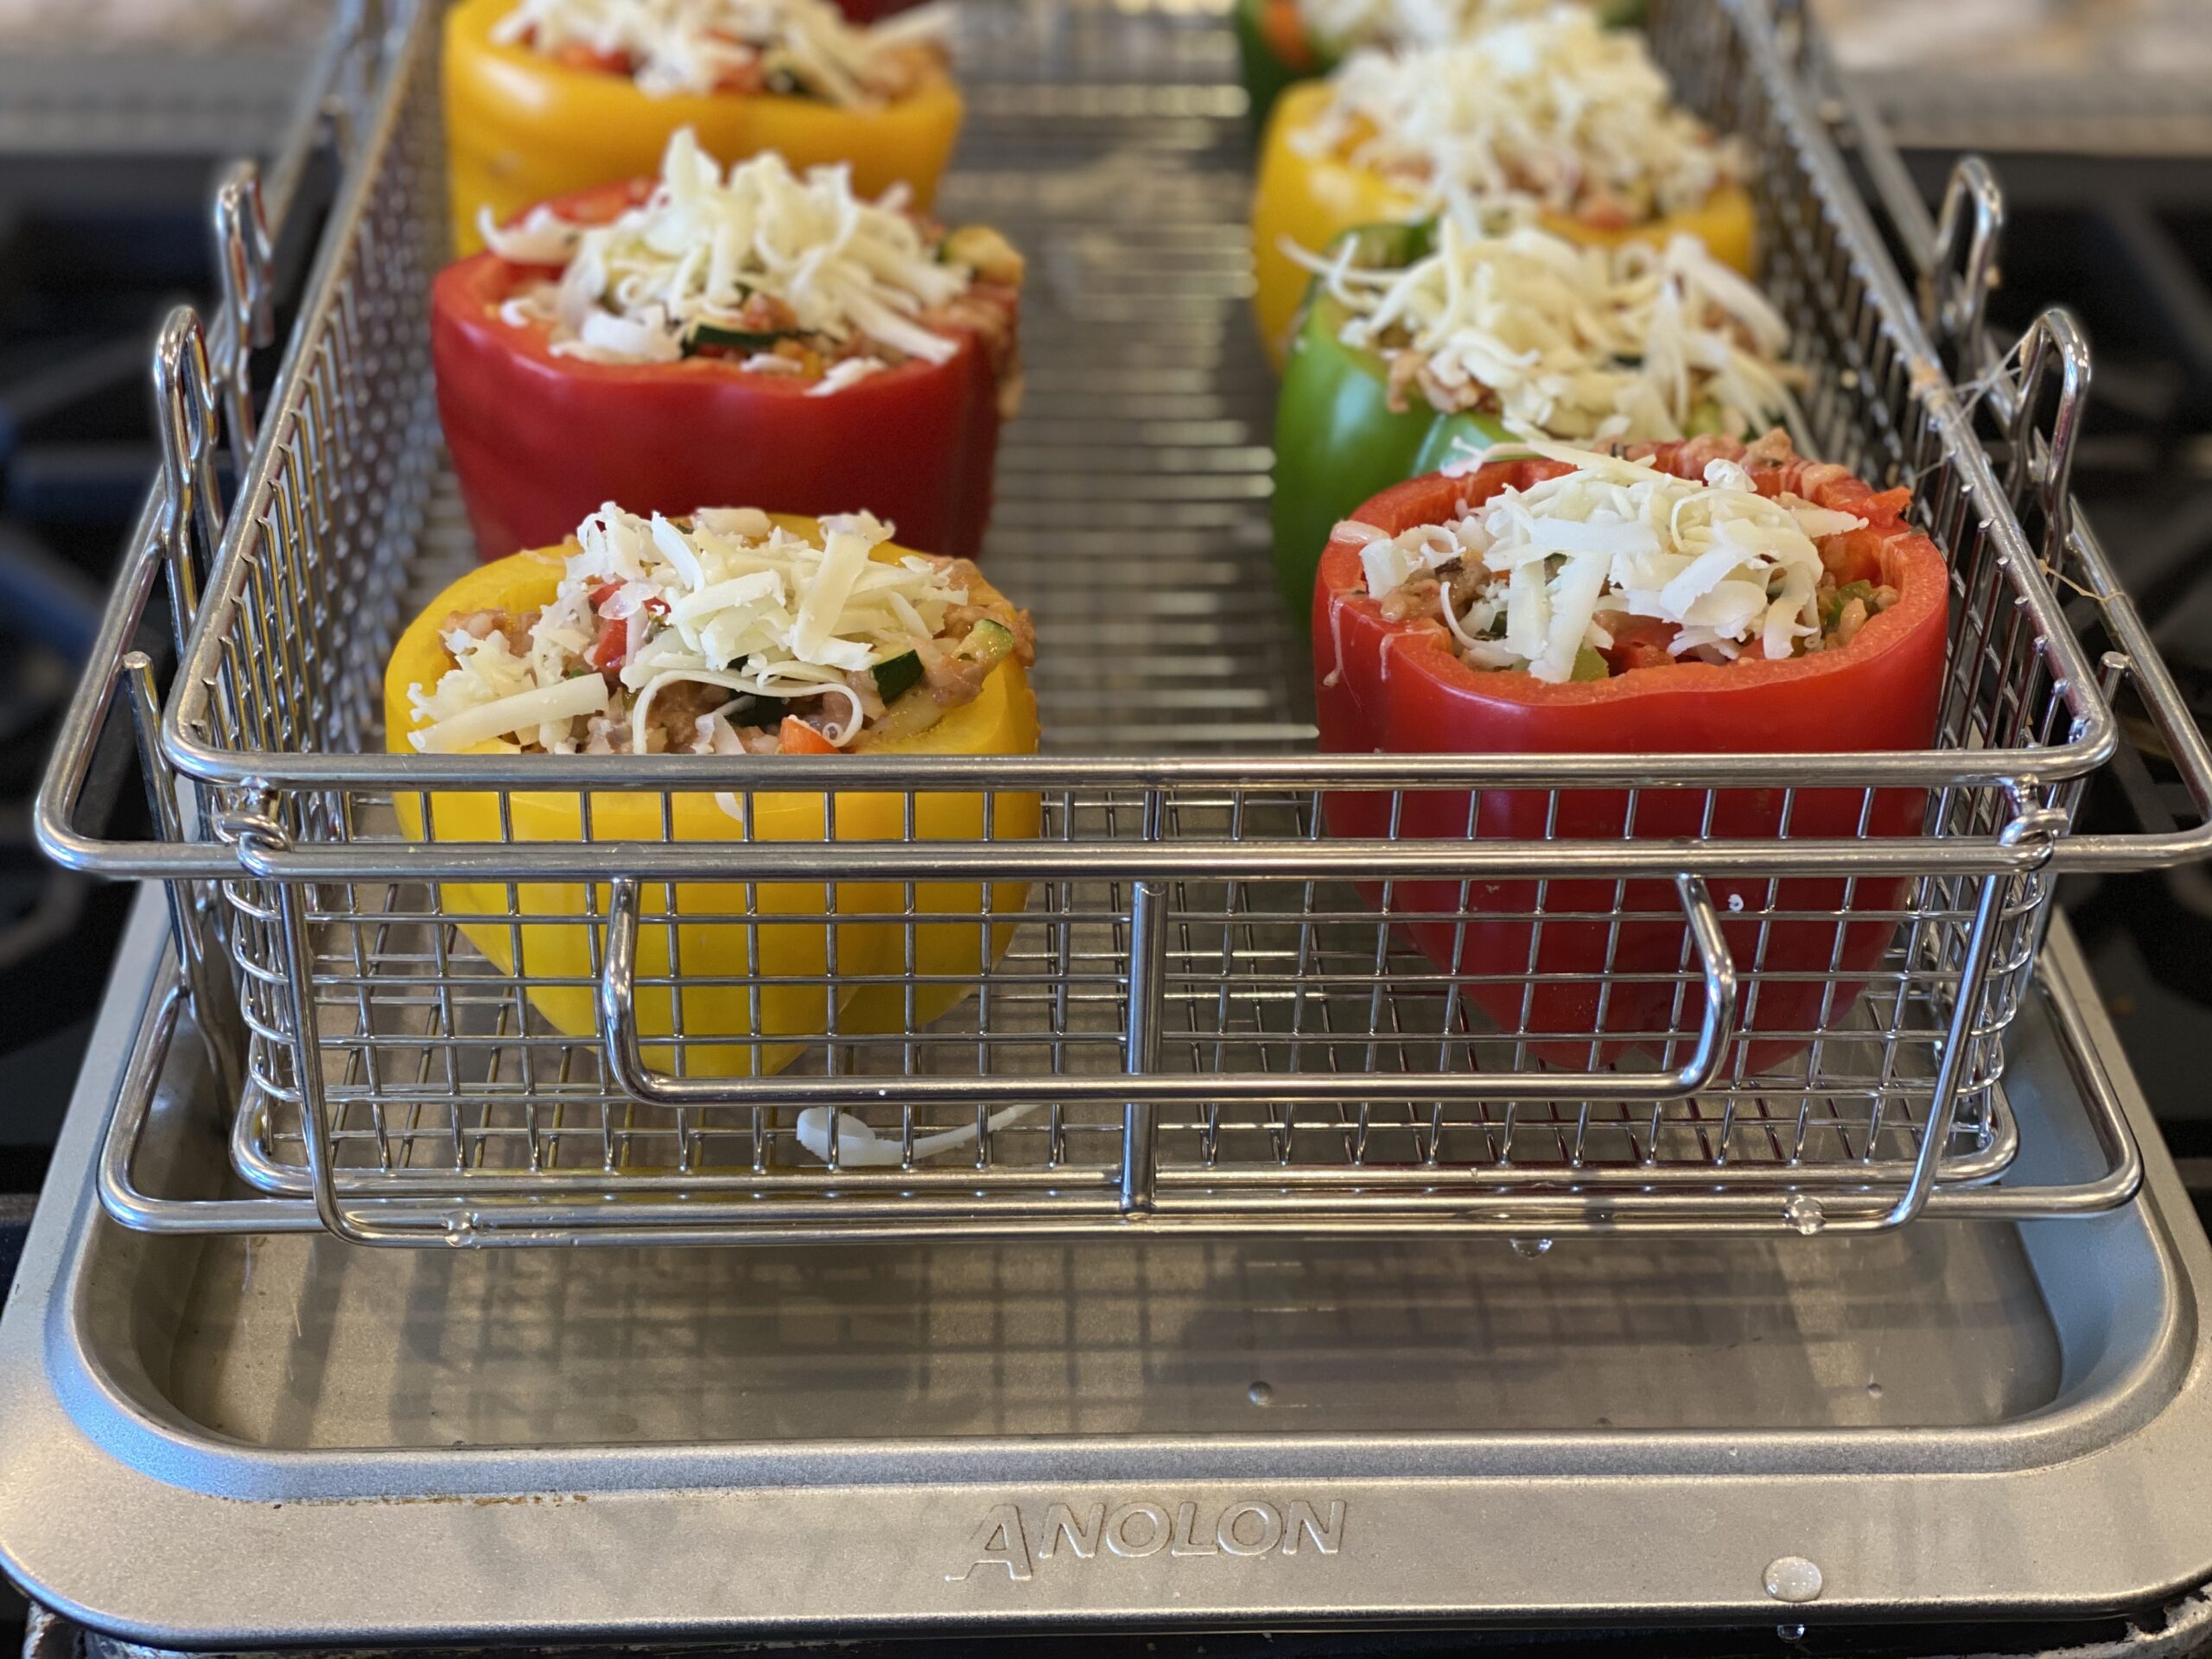 Stuffed peppers in Basquettes